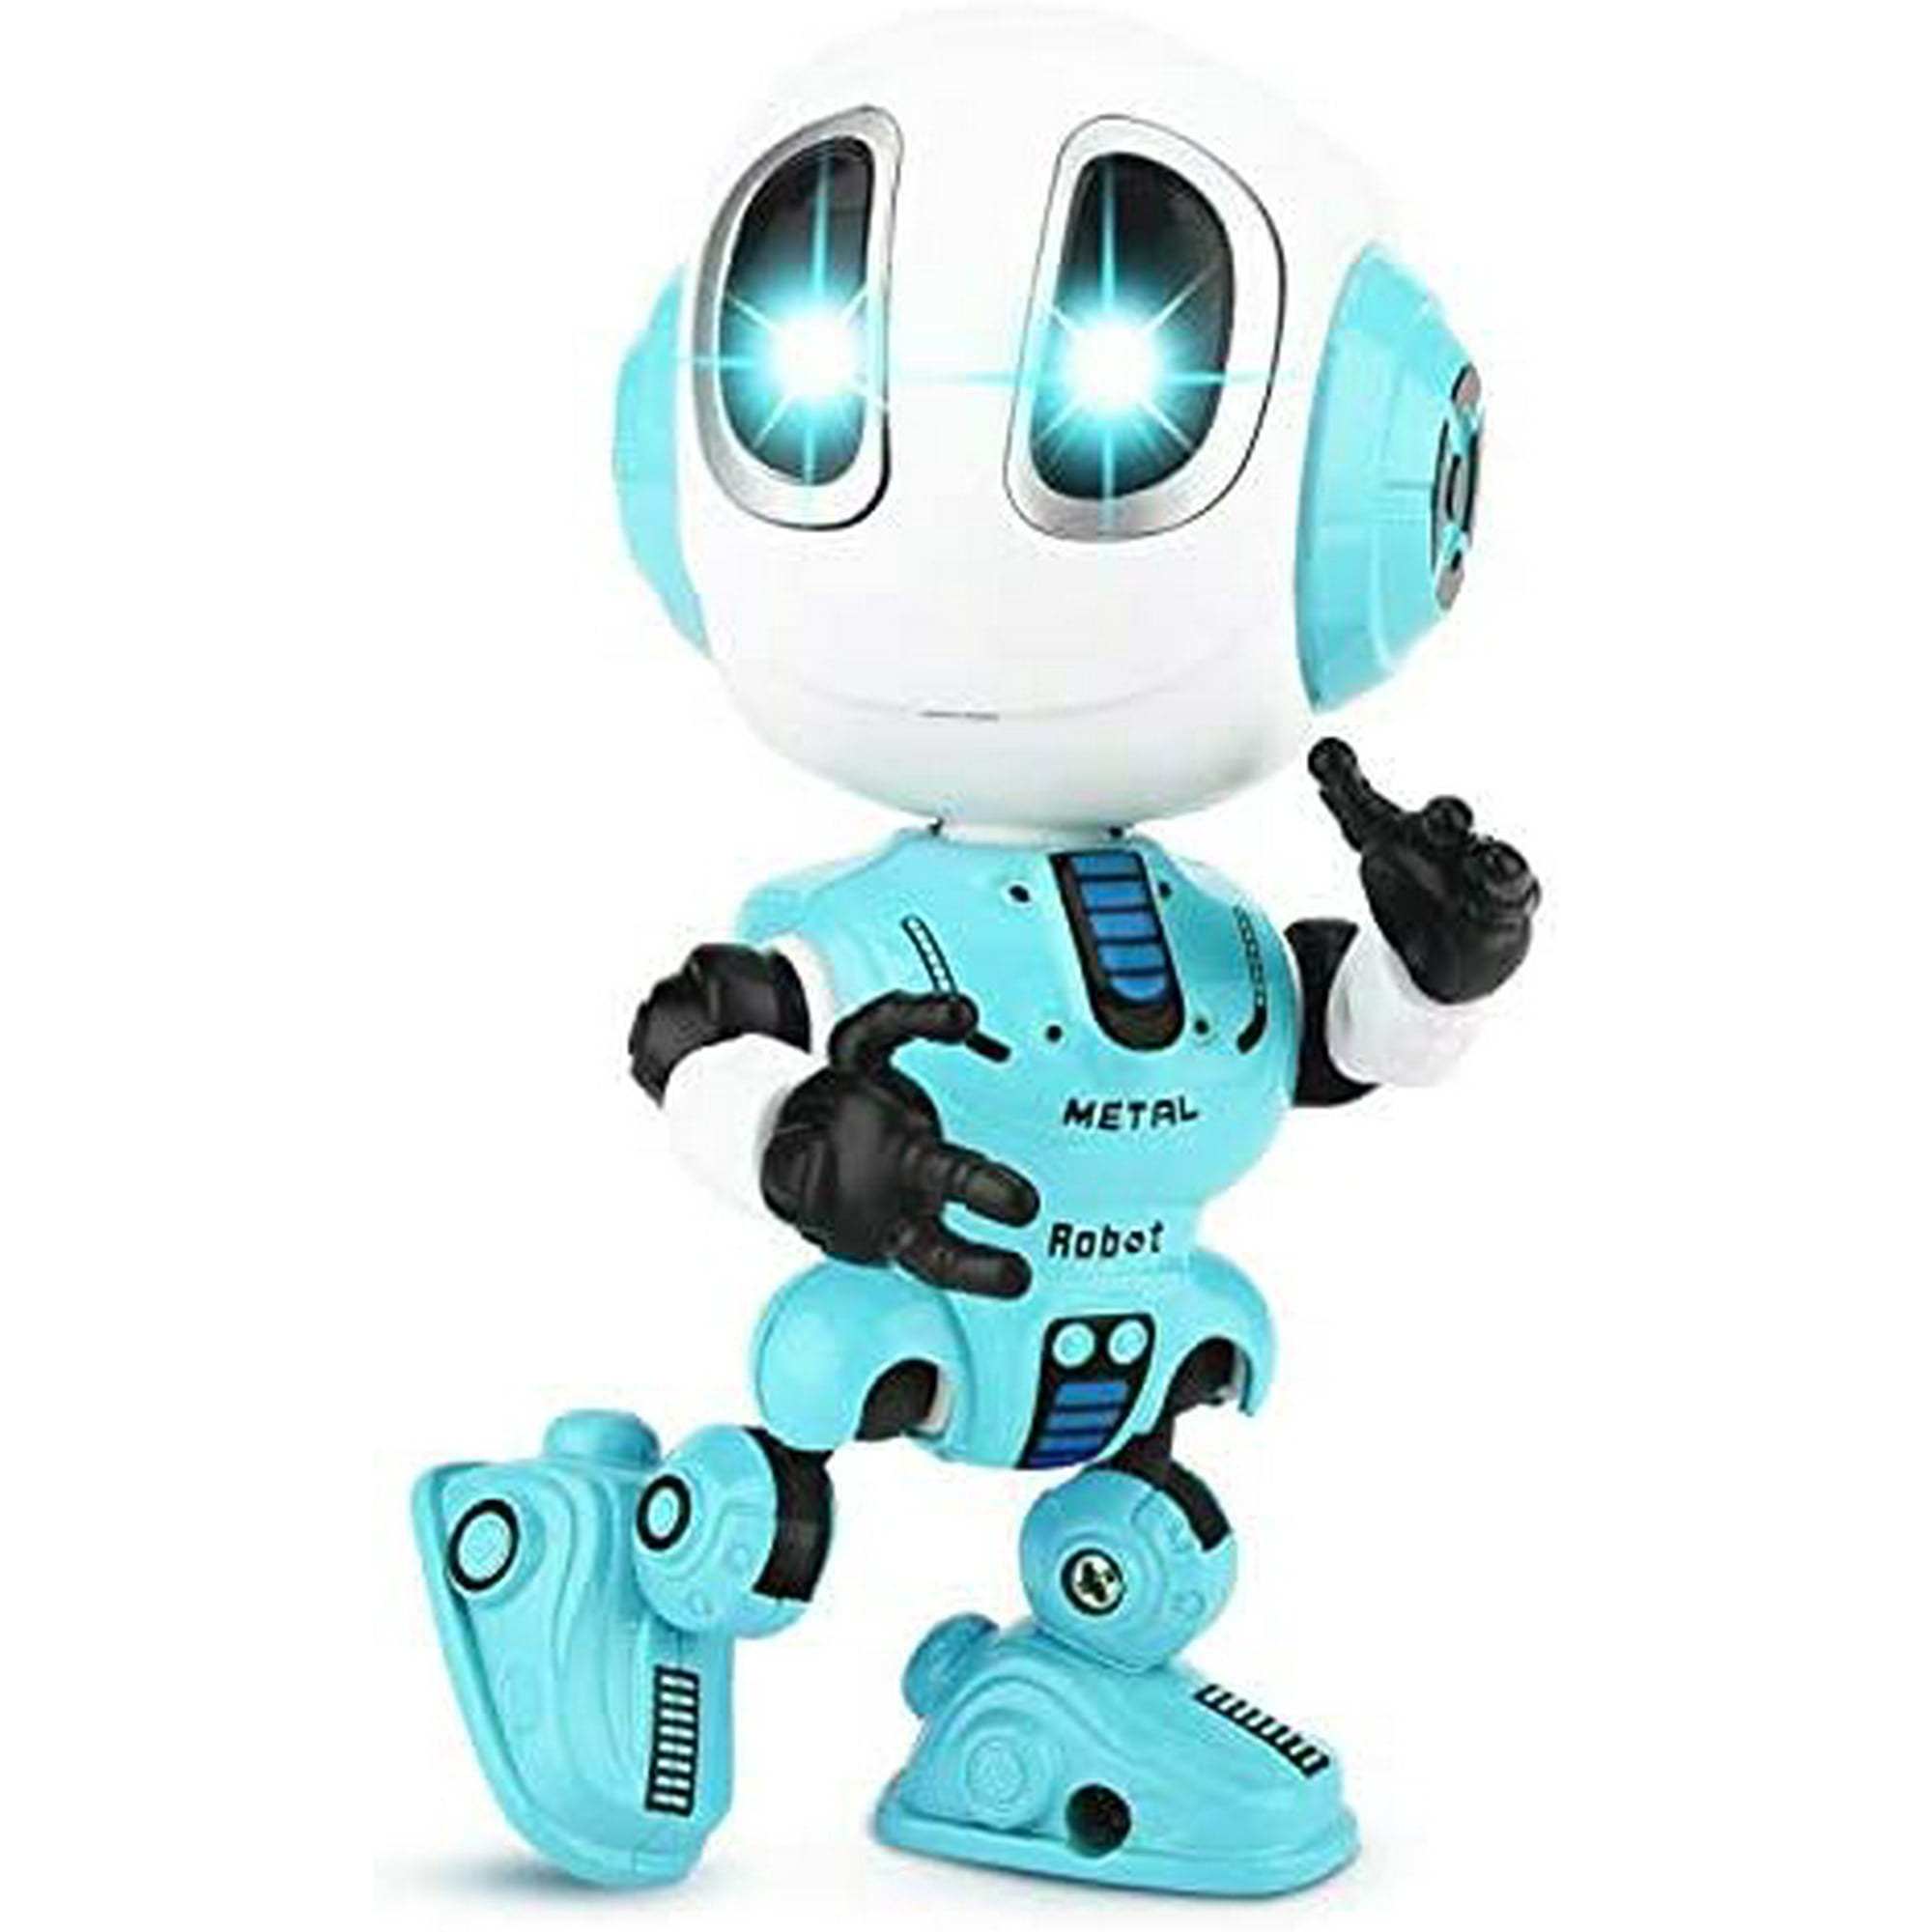 Robot Toy for Kids, Rechargeable Talking Robot for Boy and Girls, Voice  Changer with LED Eye Light , Gift for Children Age 3 Years and Up - Blue |  Walmart Canada